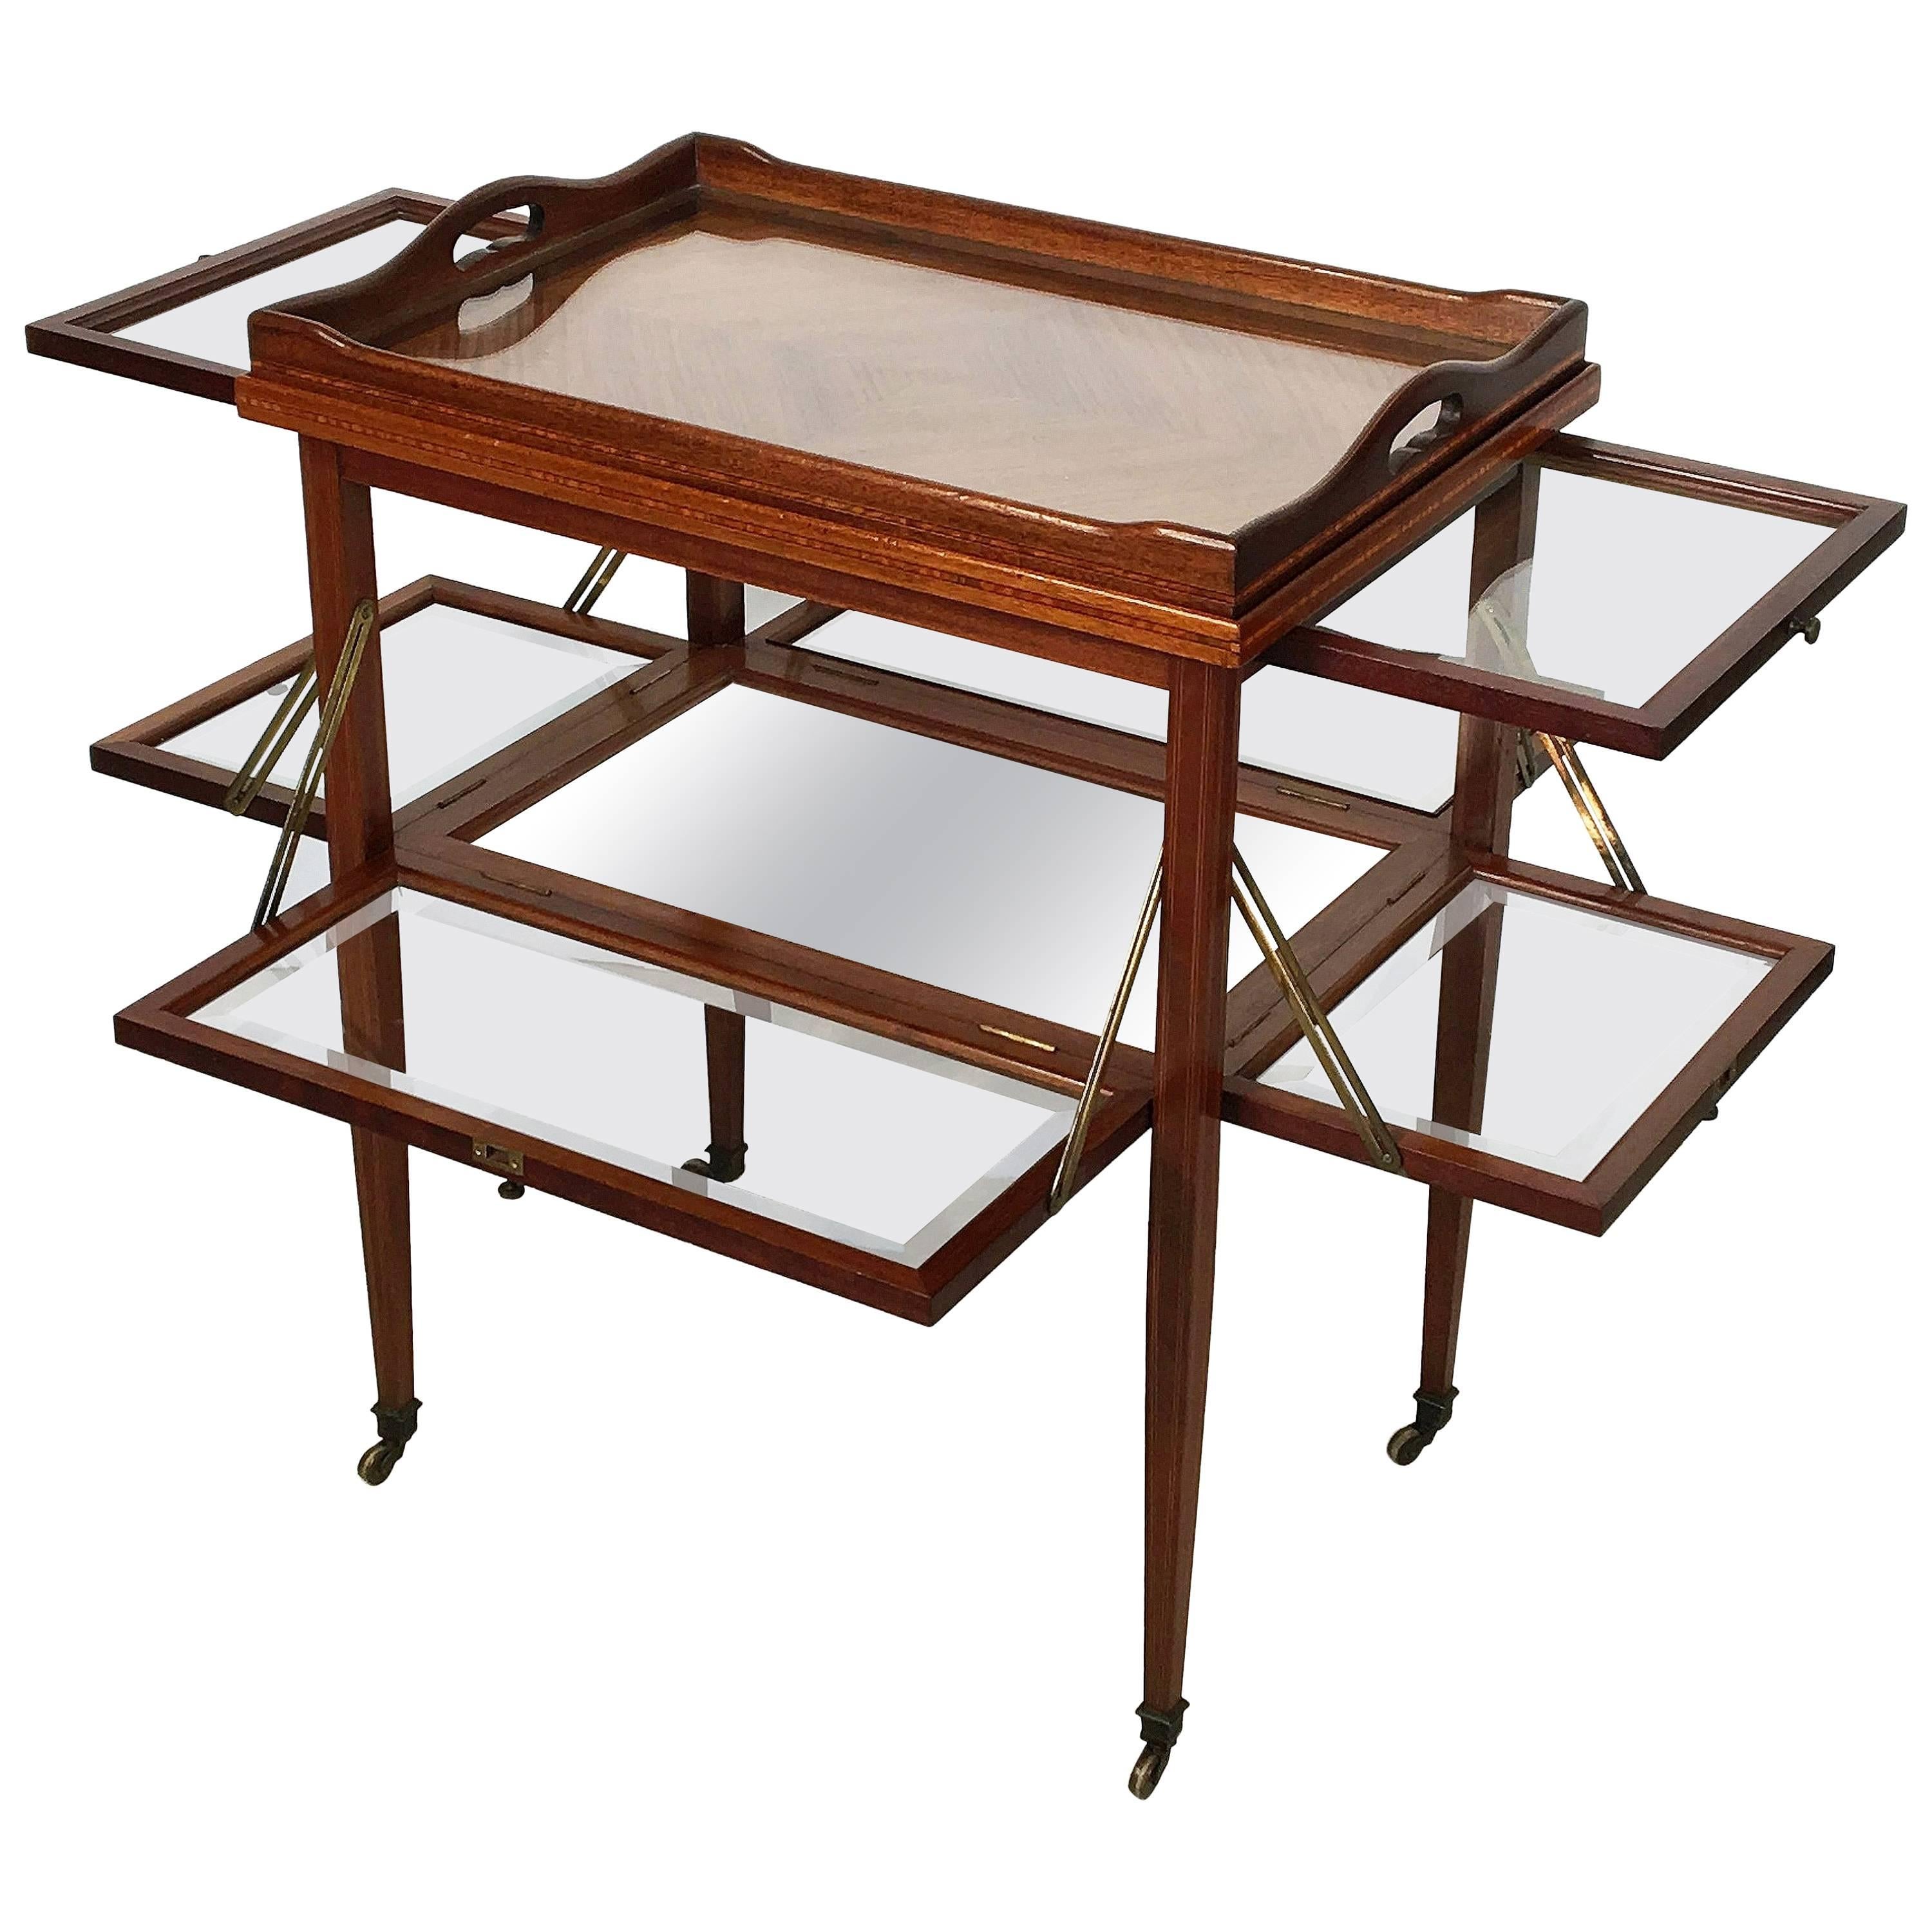 English Drinks Cart or Fold-Down Tea Table with Removable Tray Top